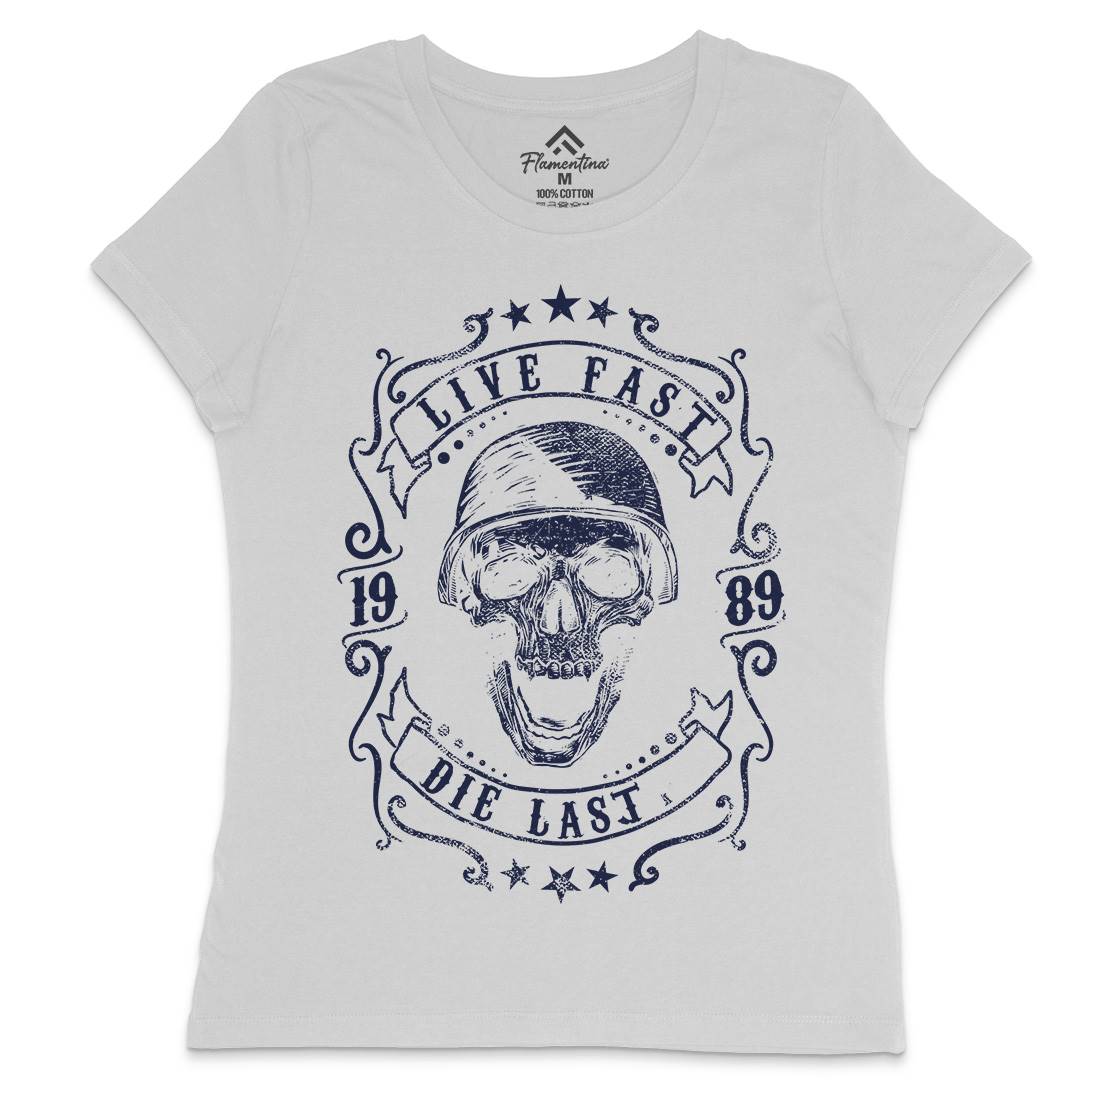 Live Fast Womens Crew Neck T-Shirt Motorcycles C961